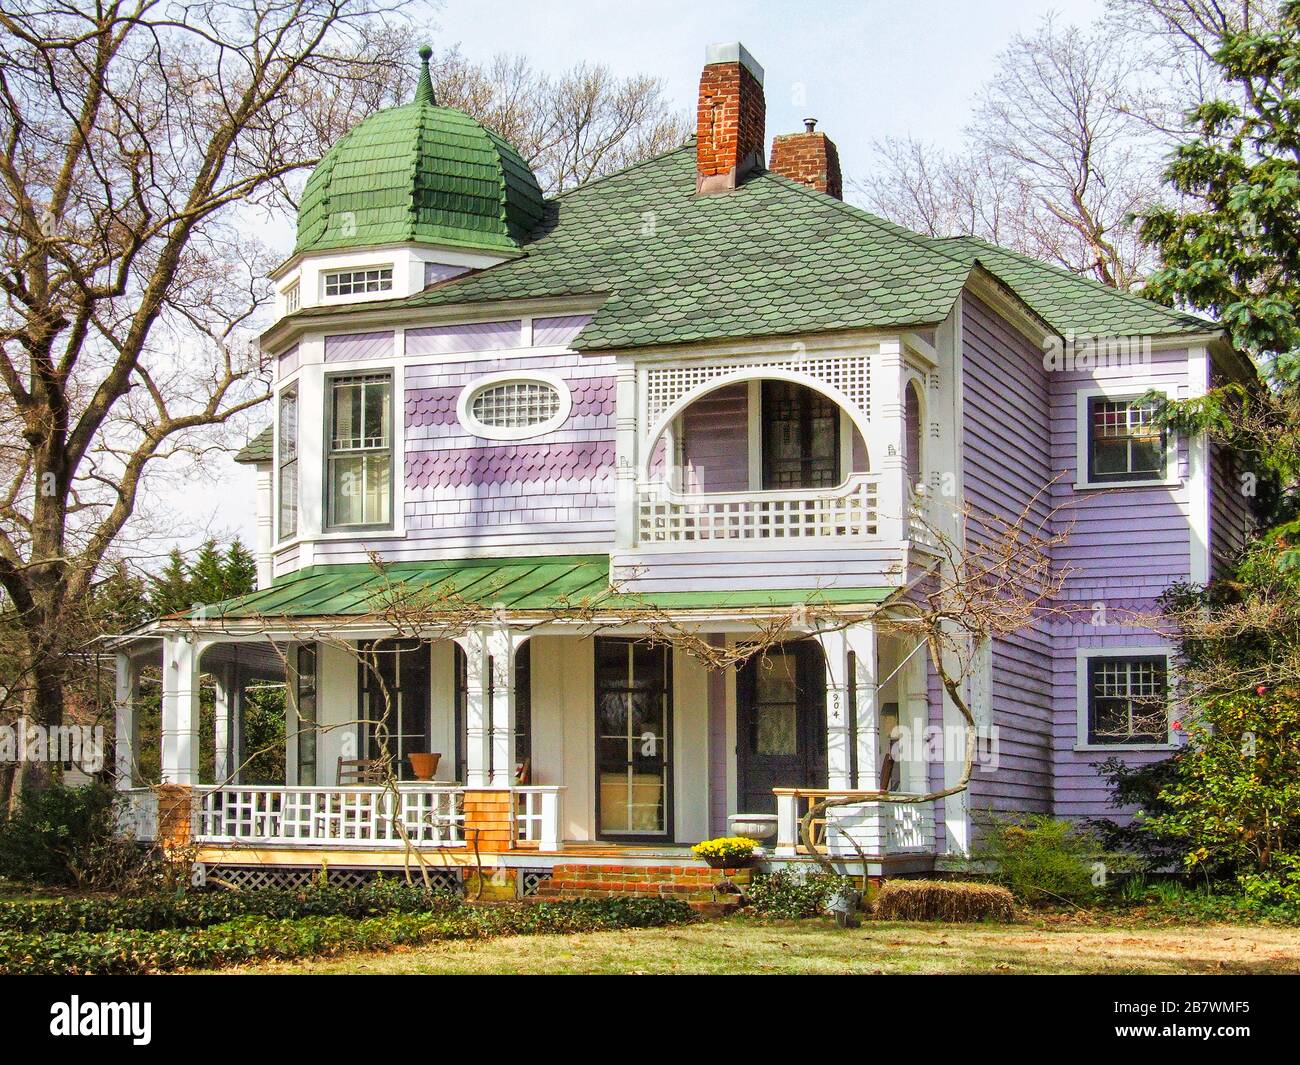 Victorian Architecture -Lilac colored house Stock Photo